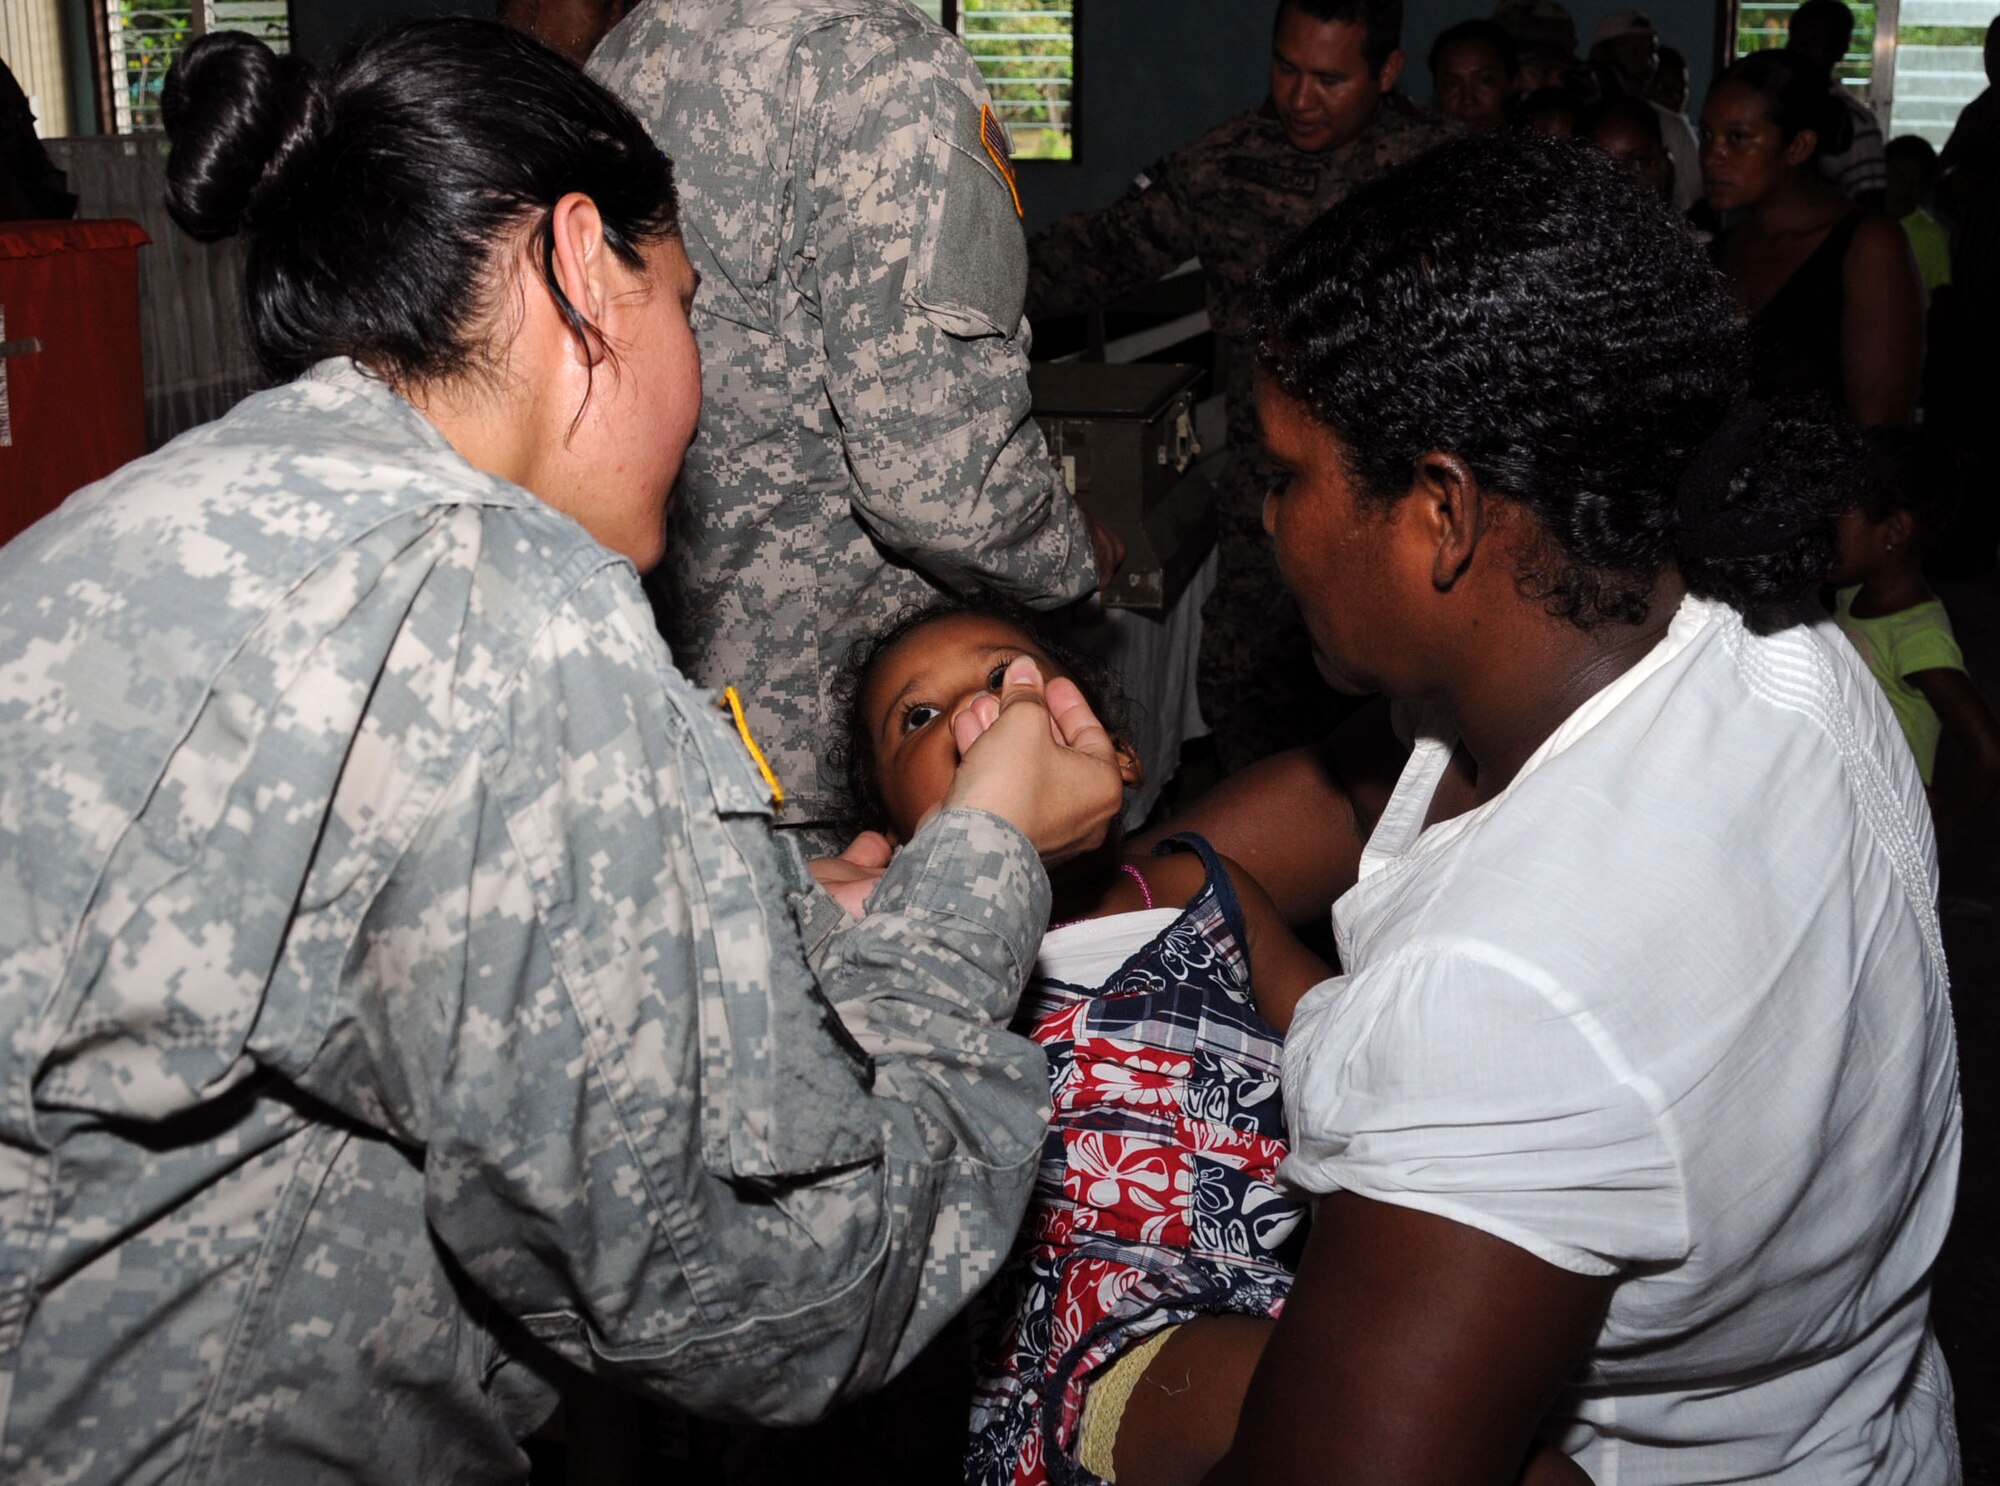 A Honduran child receives de-worming medication from a MEDEL service member during a MEDRETE.  Joint Task Force -Bravo's Medical Element (MEDEL), with support from 1-228th Aviation Regiment, JTF-Bravo Joint Security Forces and Army Forces Battalion, partnered with the Honduras Ministry of Health and the Honduran military to provide medical care to more than 650 people in the remote village of Barra Patuca in the Department of Gracias a Dios, Honduras, during a Medical Readiness Training Exercise (MEDRETE), July 17, 2014.  The multi-national team worked together to provide preventative medicine to the villagers, including classes on hygiene, preventative dental care, and nutrition. They also provided immunizations to infants, dental care, wellness checkups, medications, and minor medical procedures.  (Photo by U. S. Air National Guard Capt. Steven Stubbs)